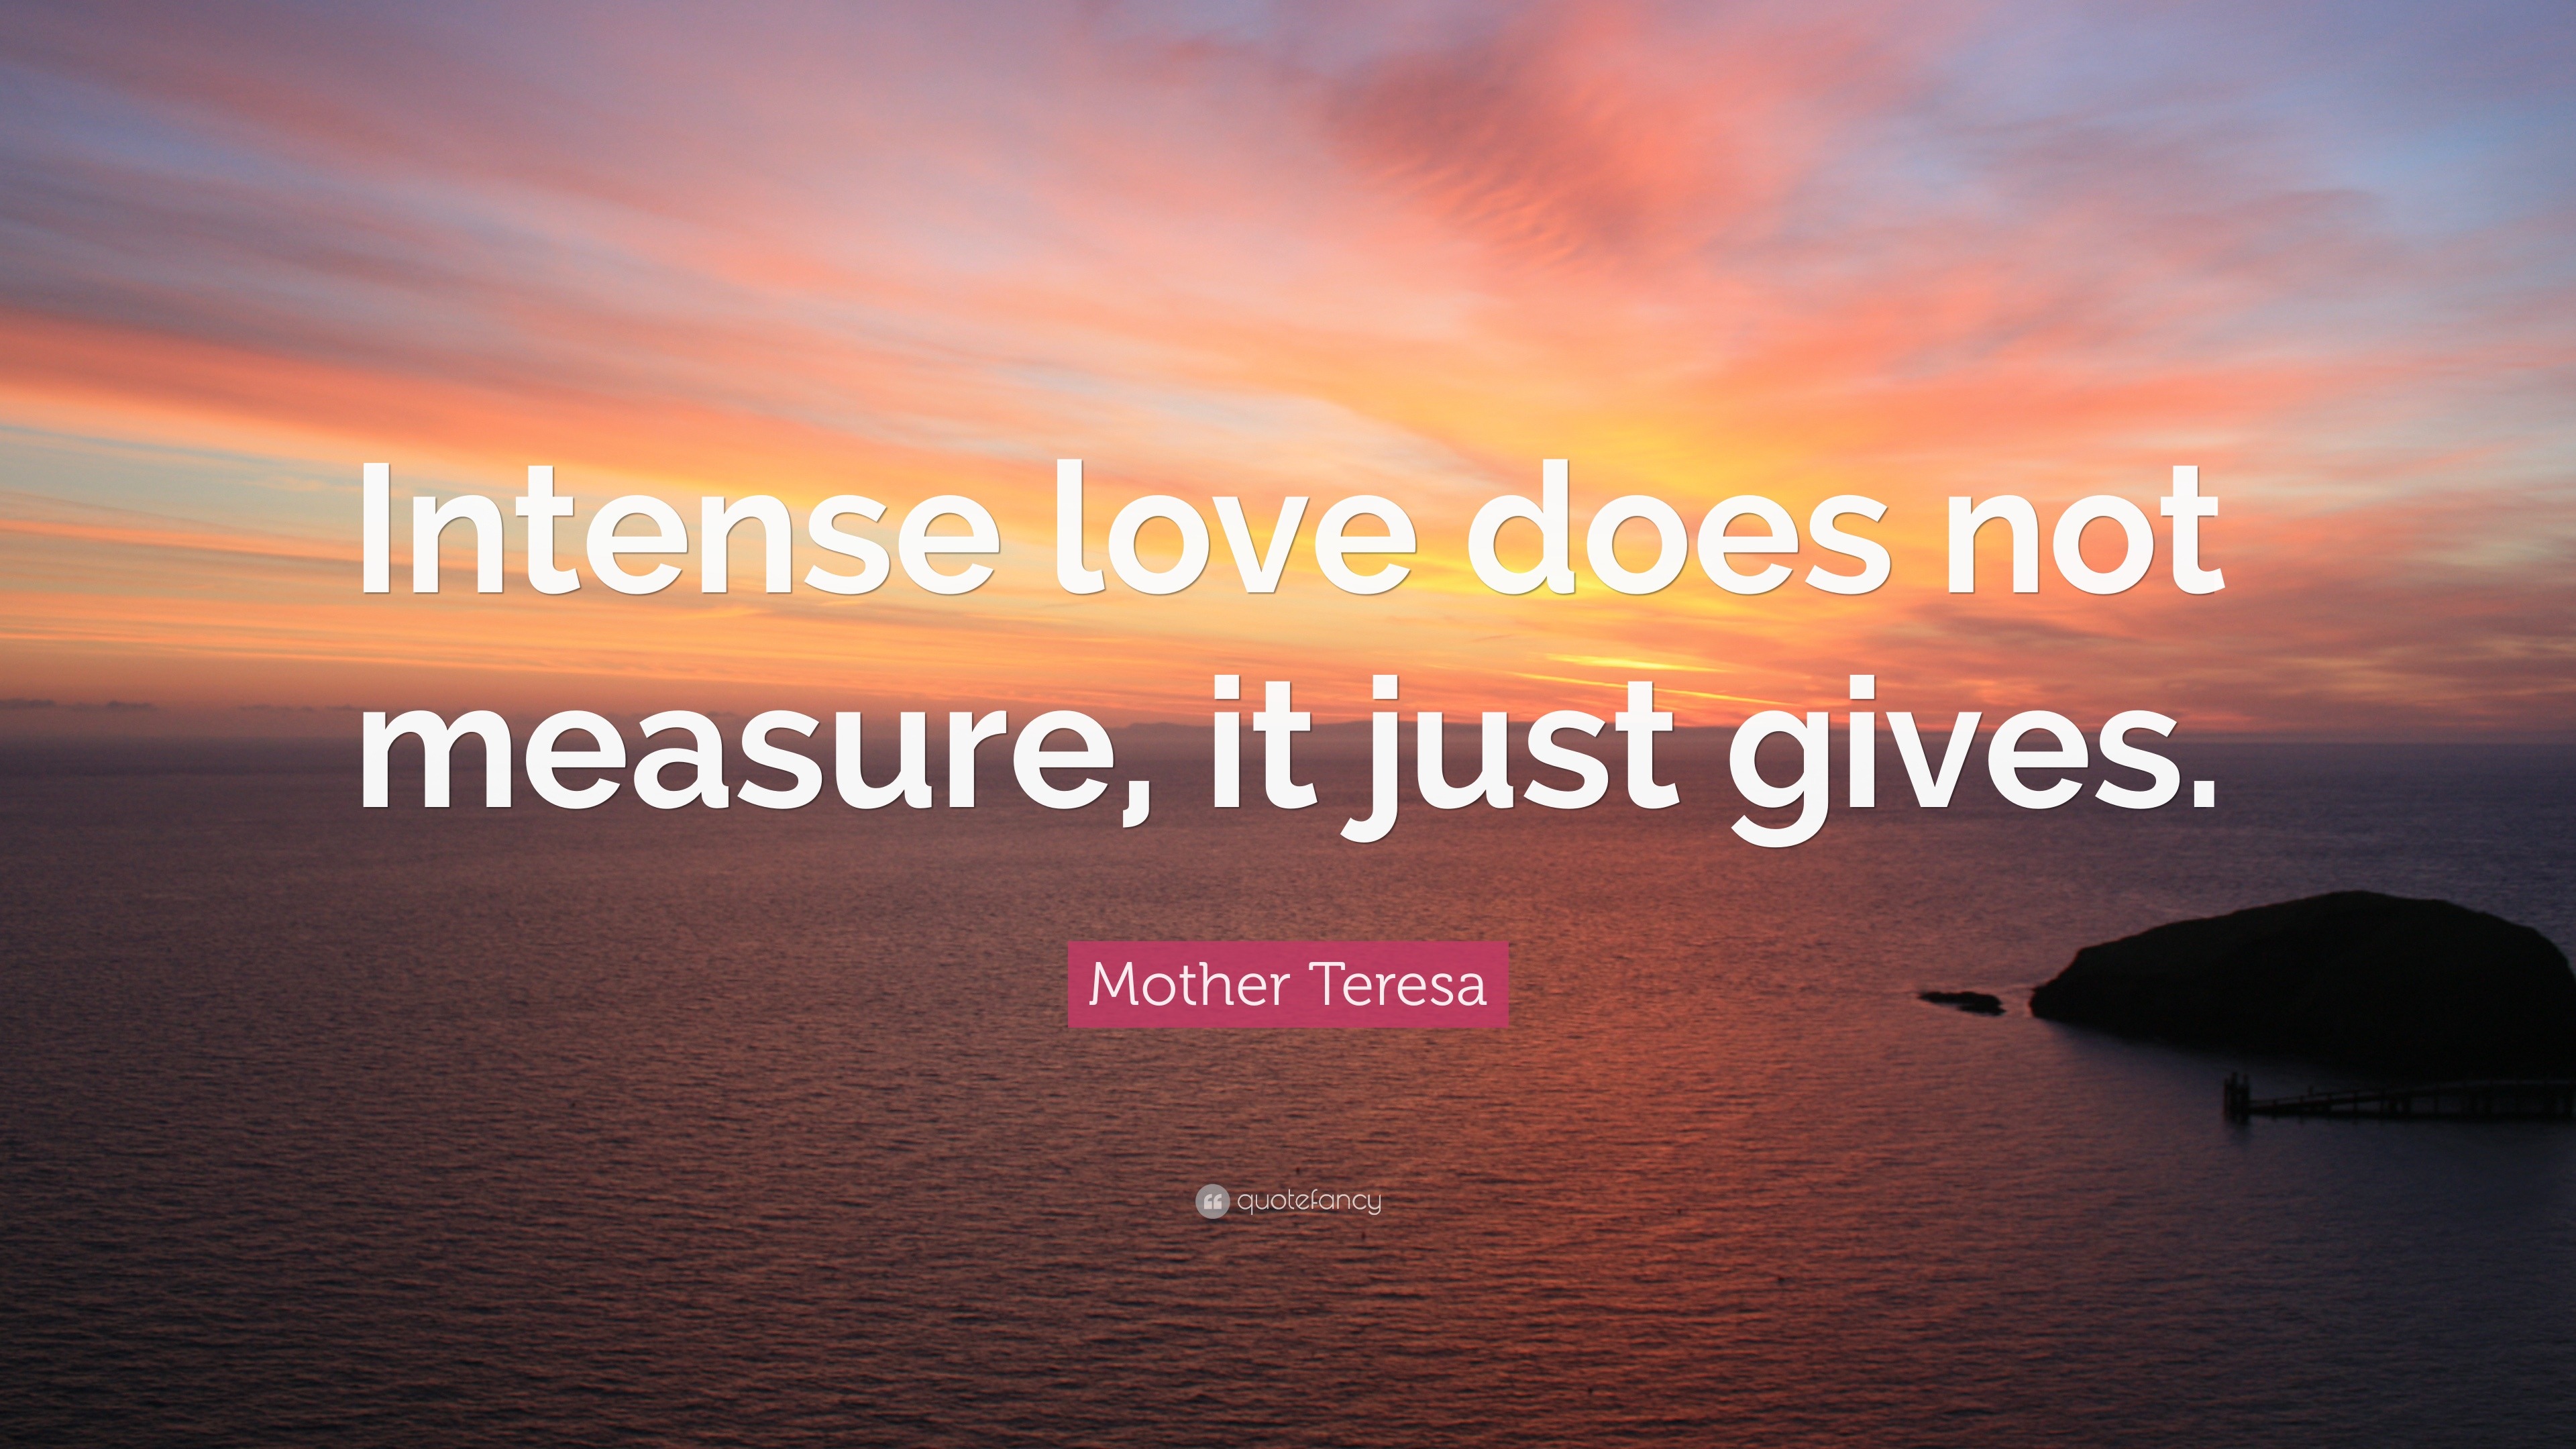 Mother Teresa Quote “Intense love does not measure it just gives ”